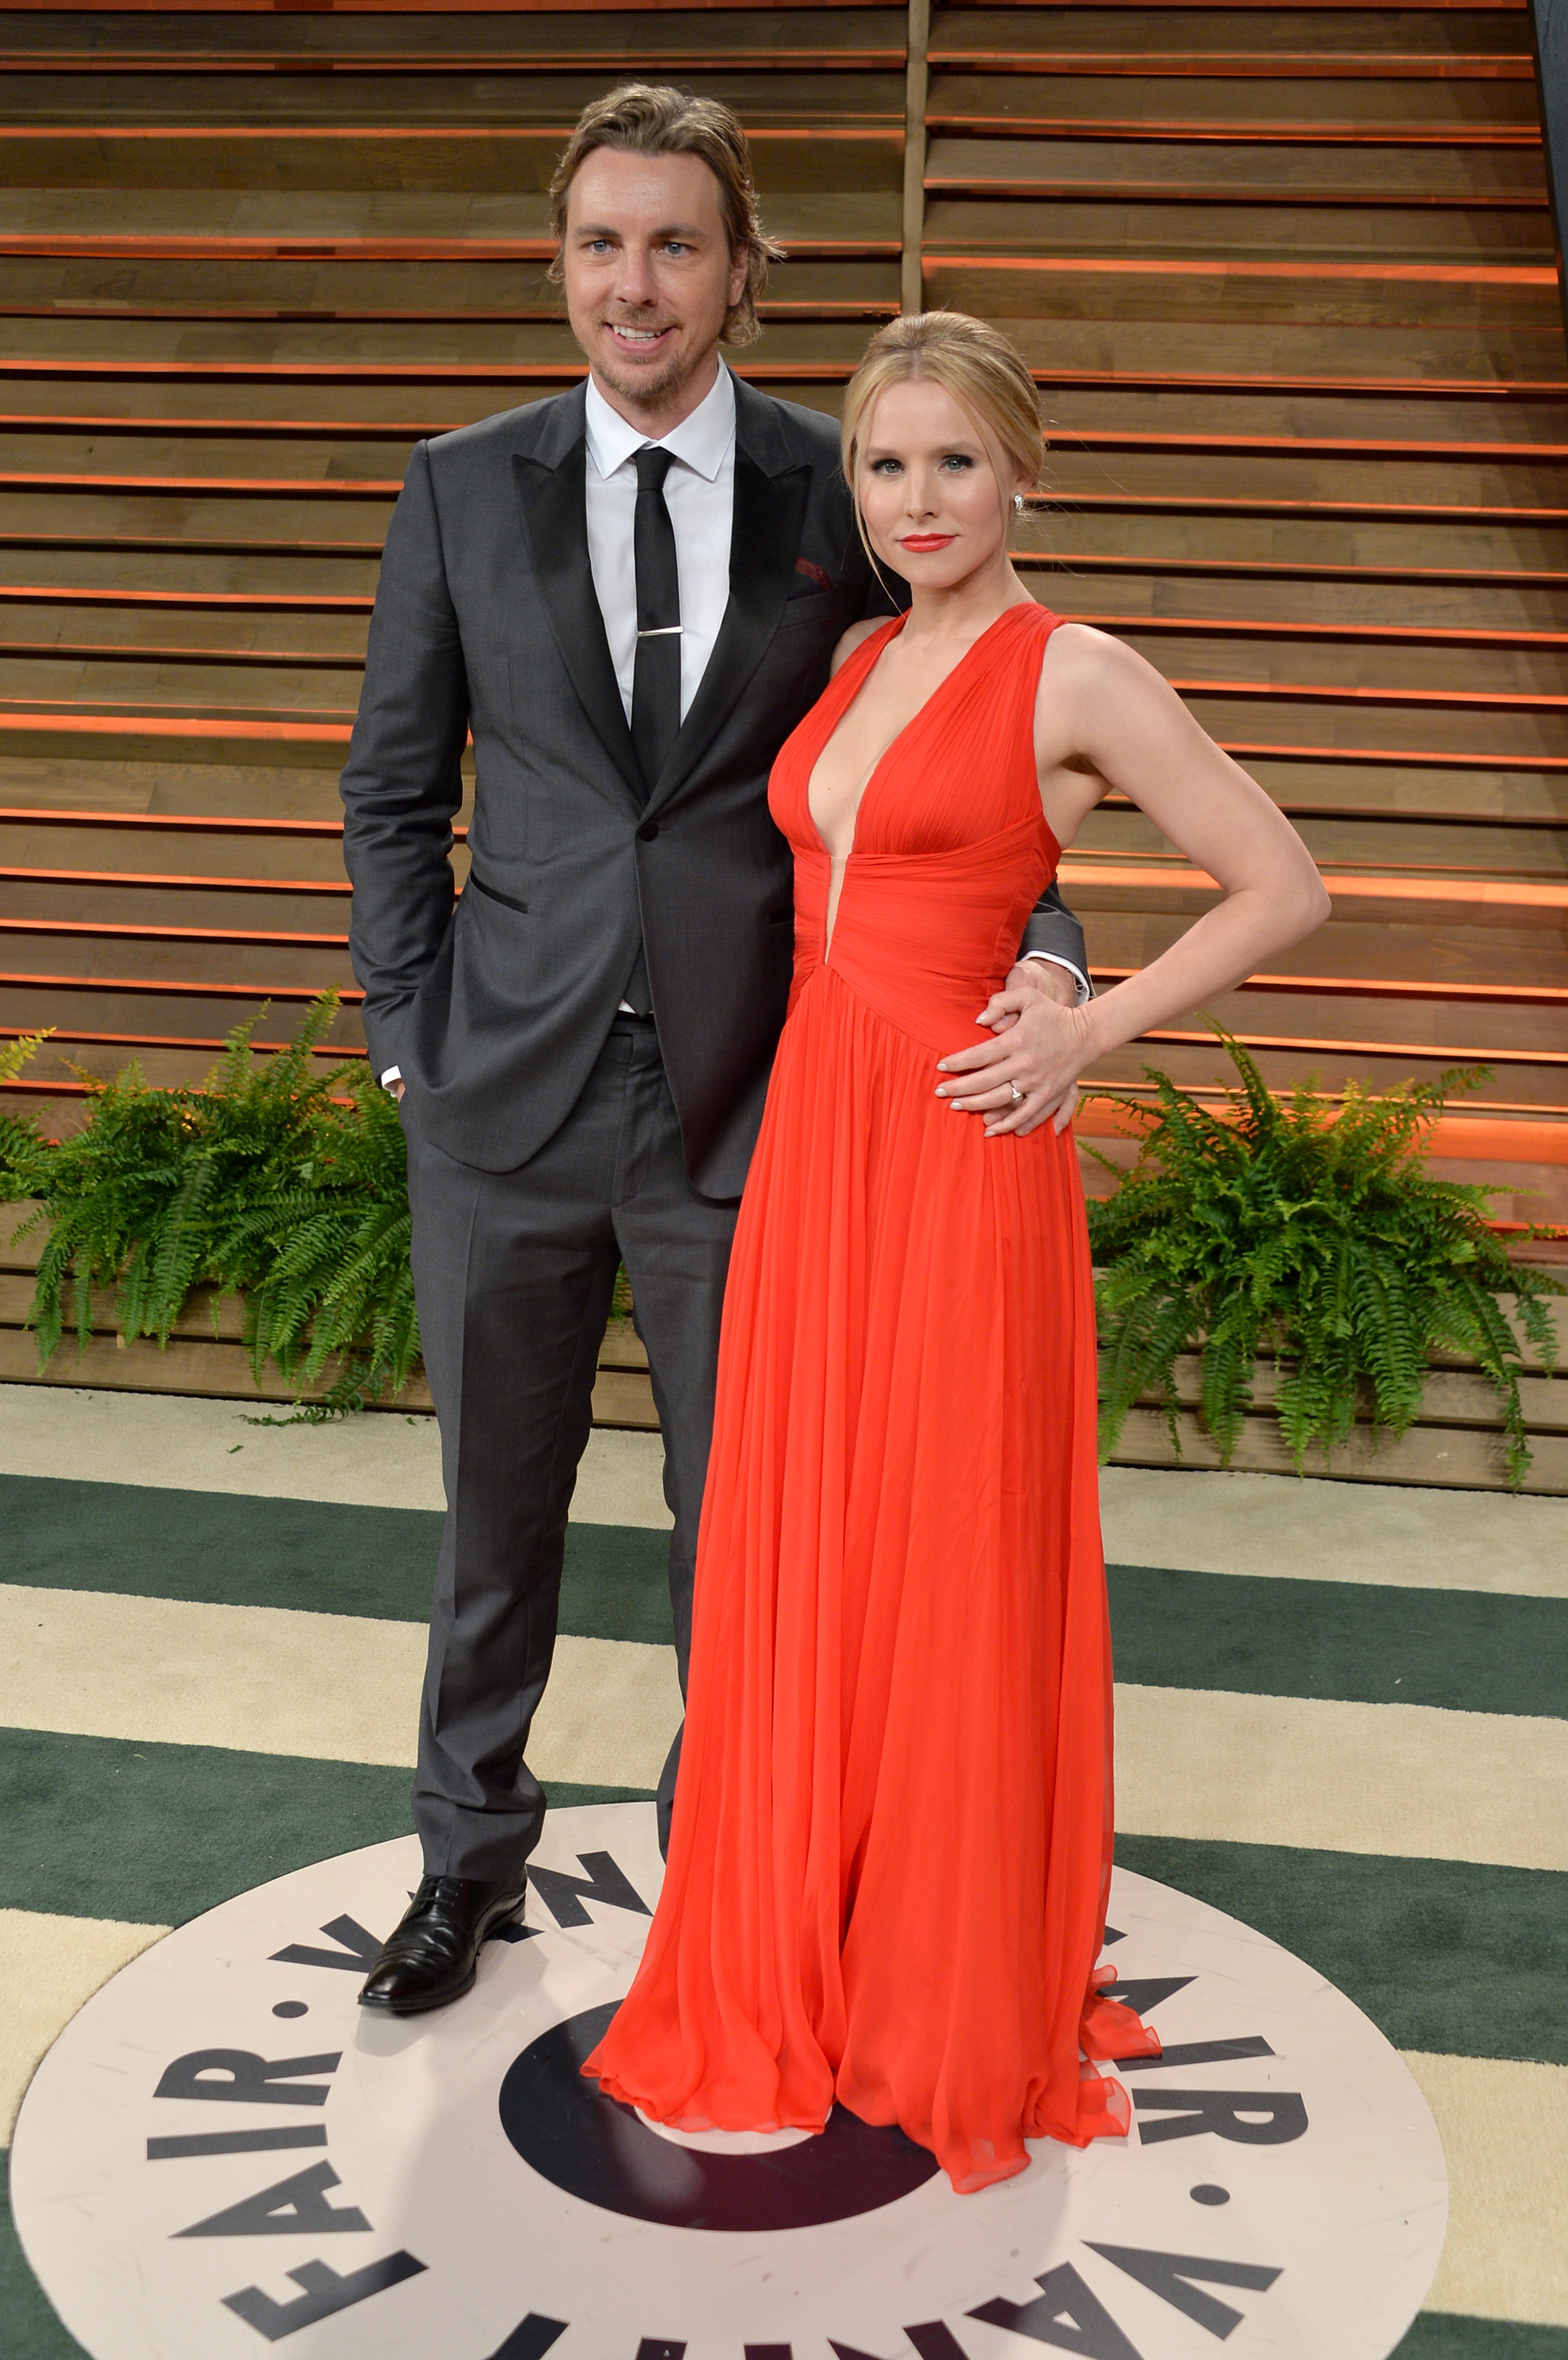 Dax Shepard and Kristen Bell at the Vanity Fair Oscar Party in West Hollywood, California on March 2, 2014 | Source: Getty Images